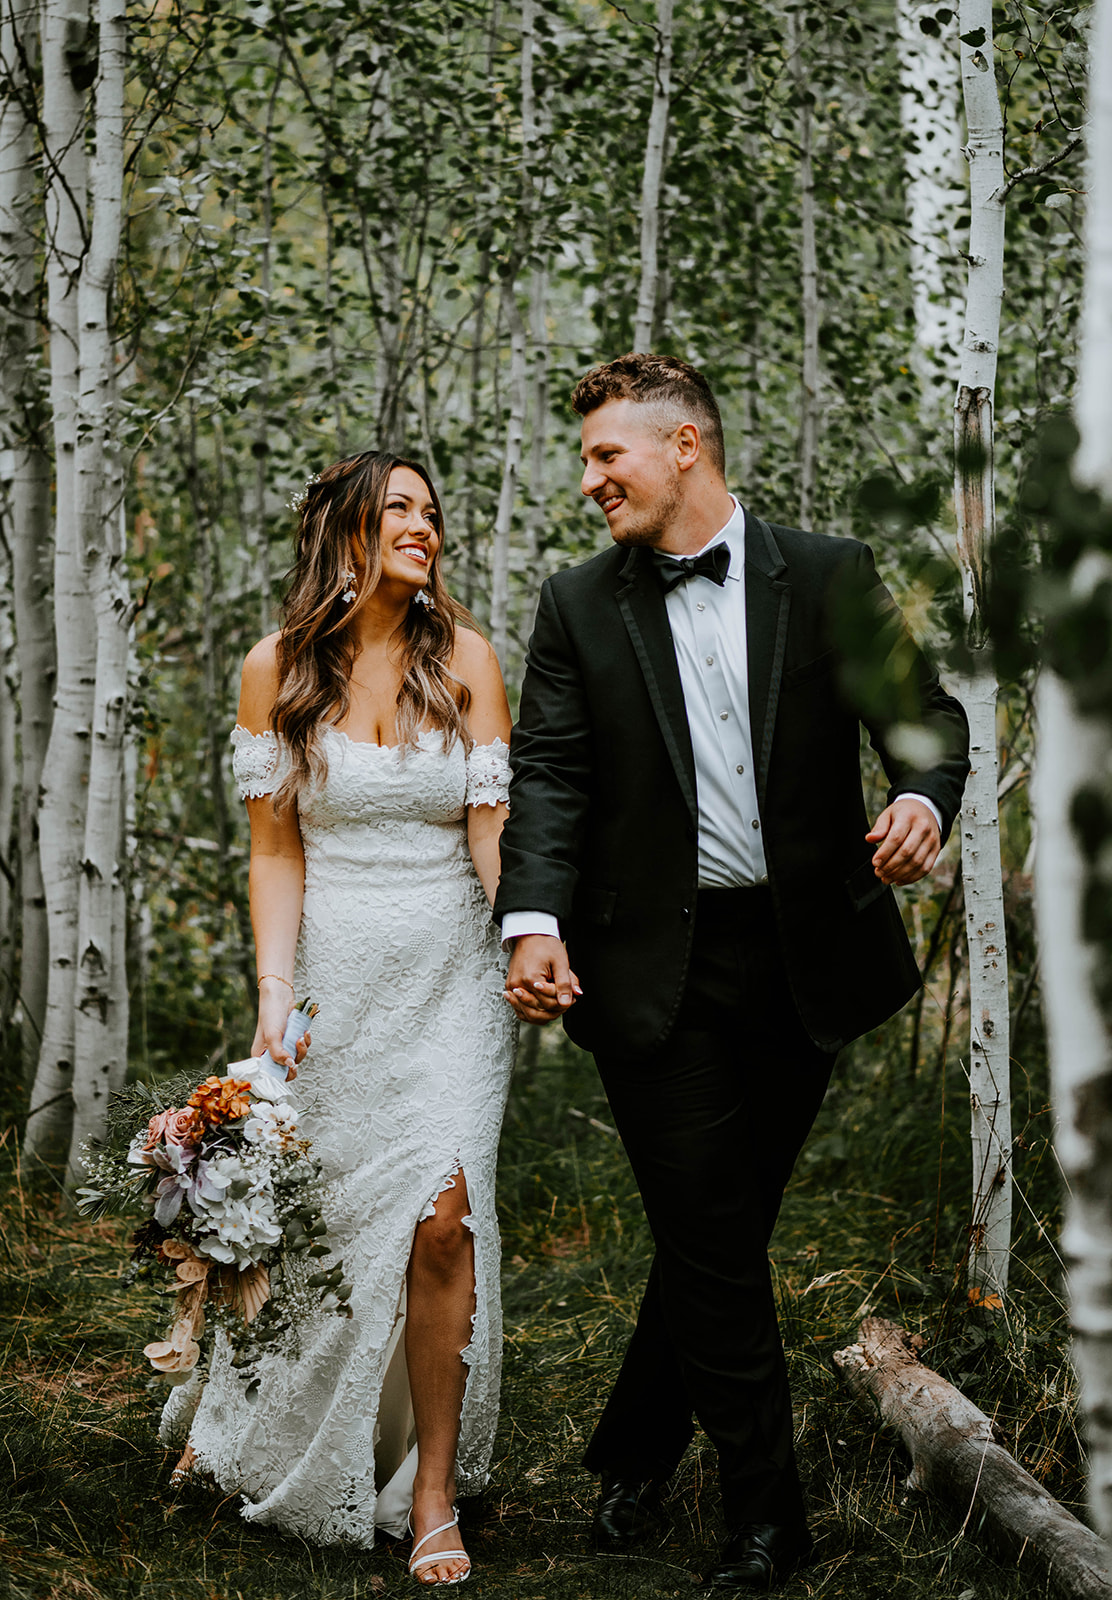 Bride and groom walking through the aspen trees at shevlin park together